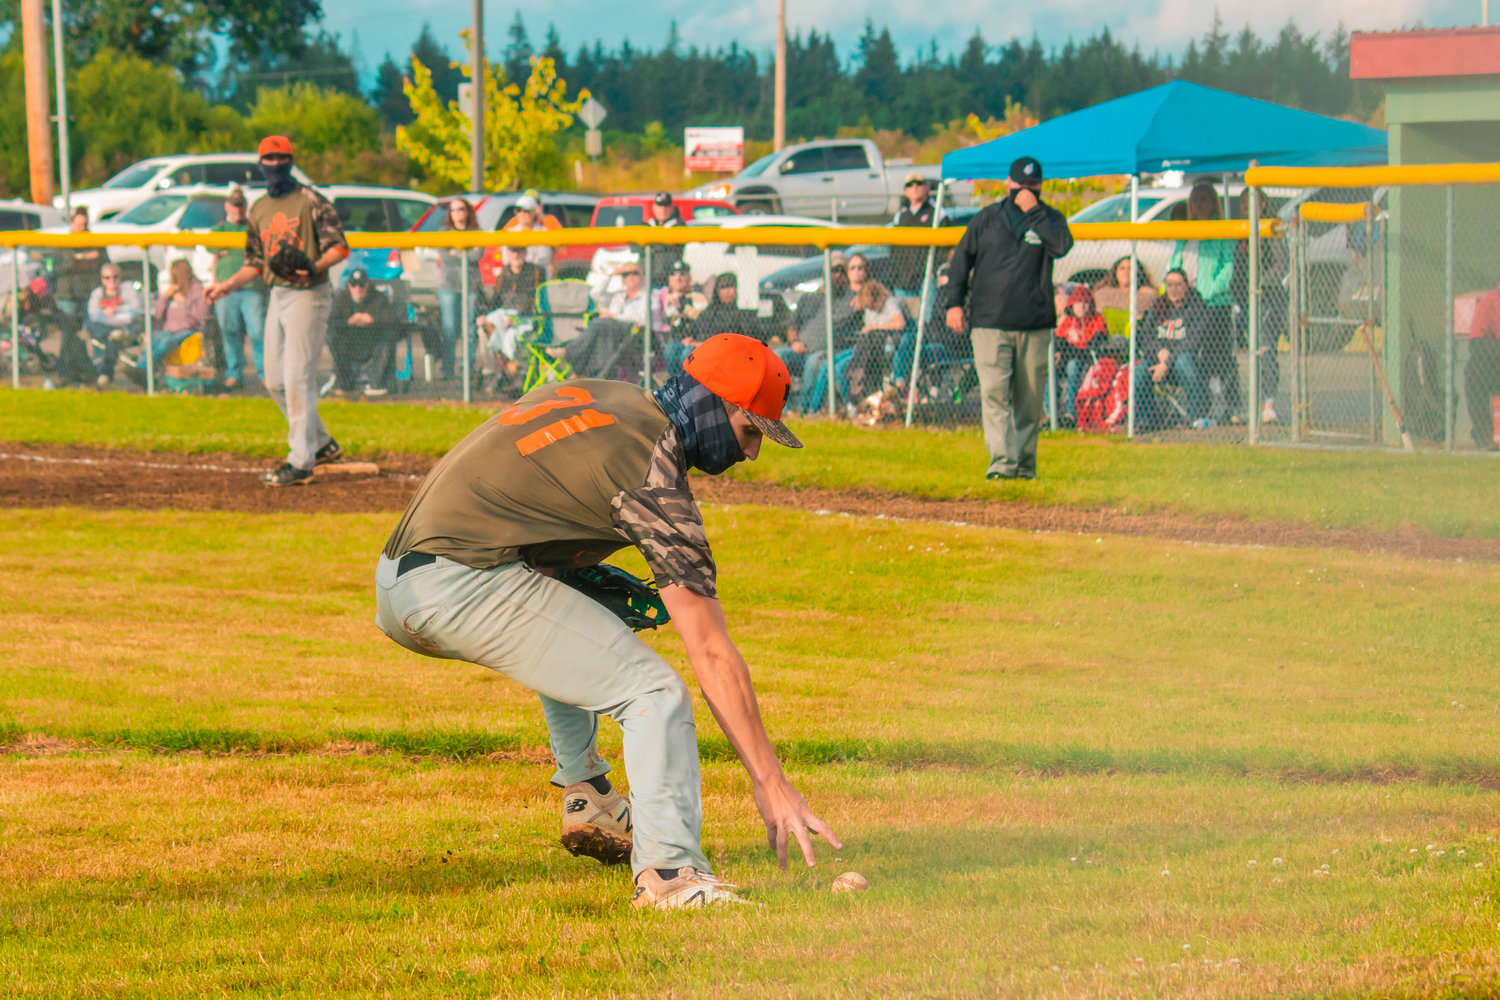 Kyuss Mano (31) fields a grounder during a game against Toledo Tuesday afternoon in Winlock.